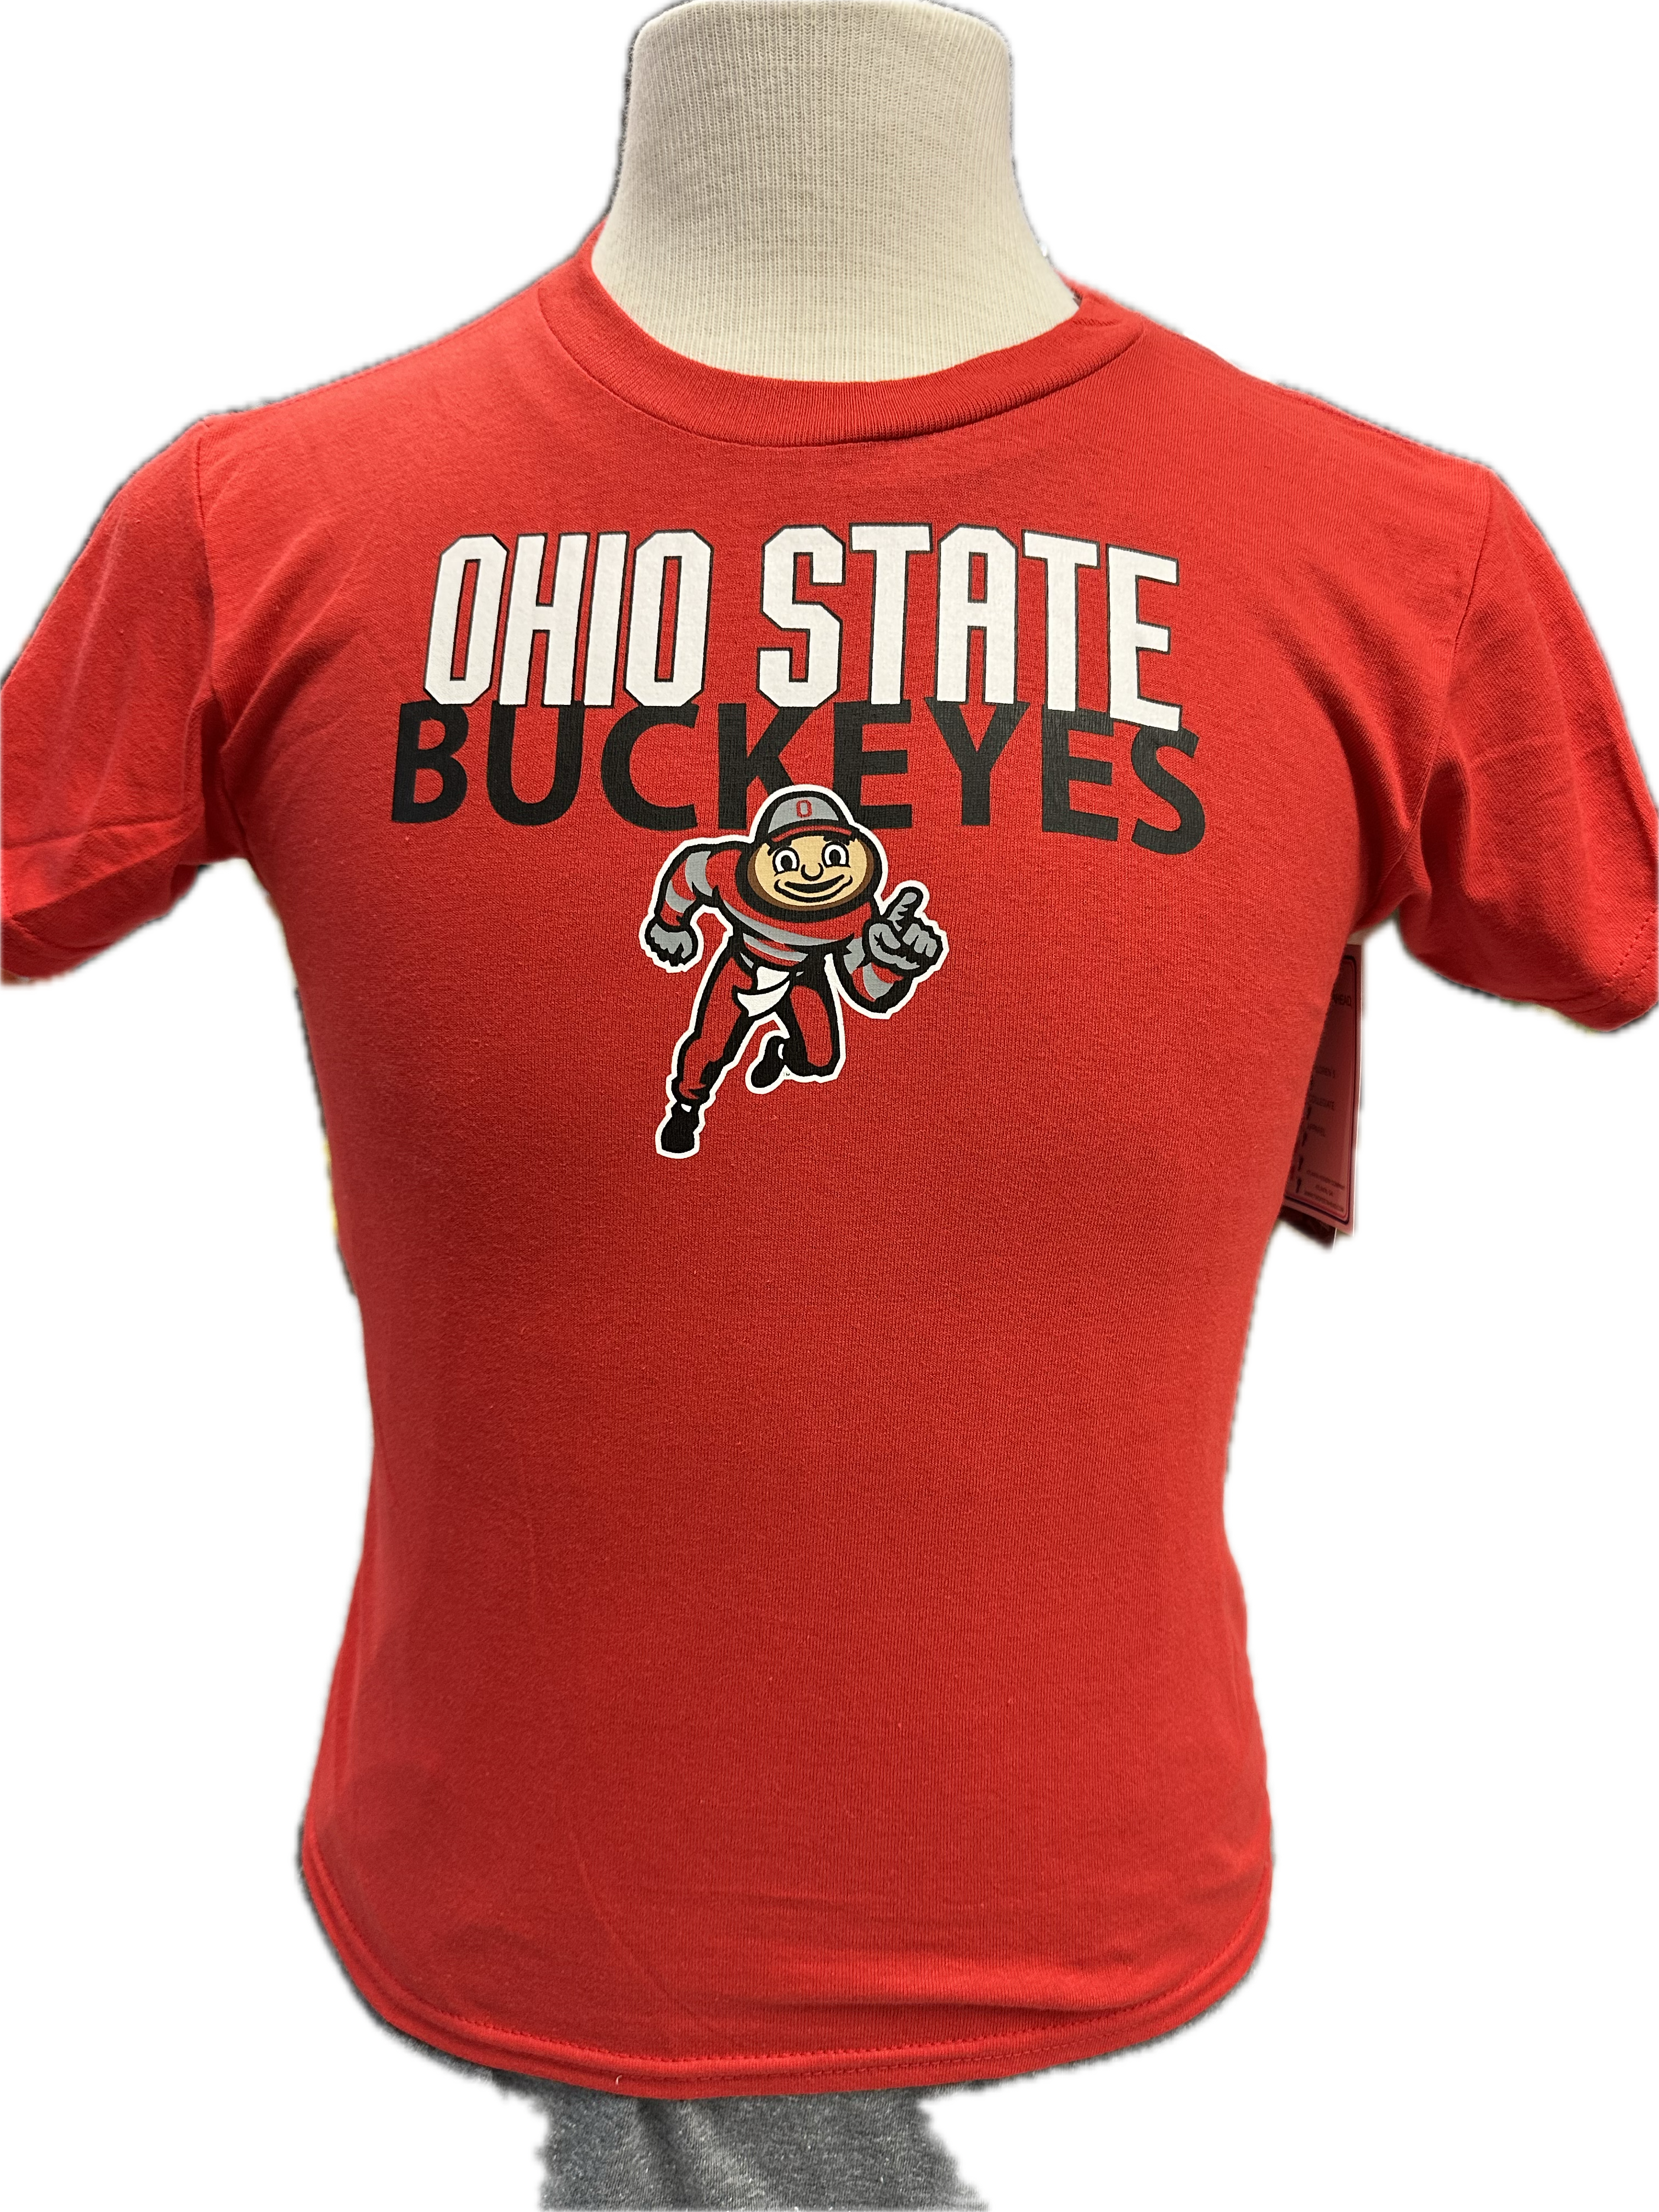 OHIO STATE BUCKEYES- RED YOUTH TEE